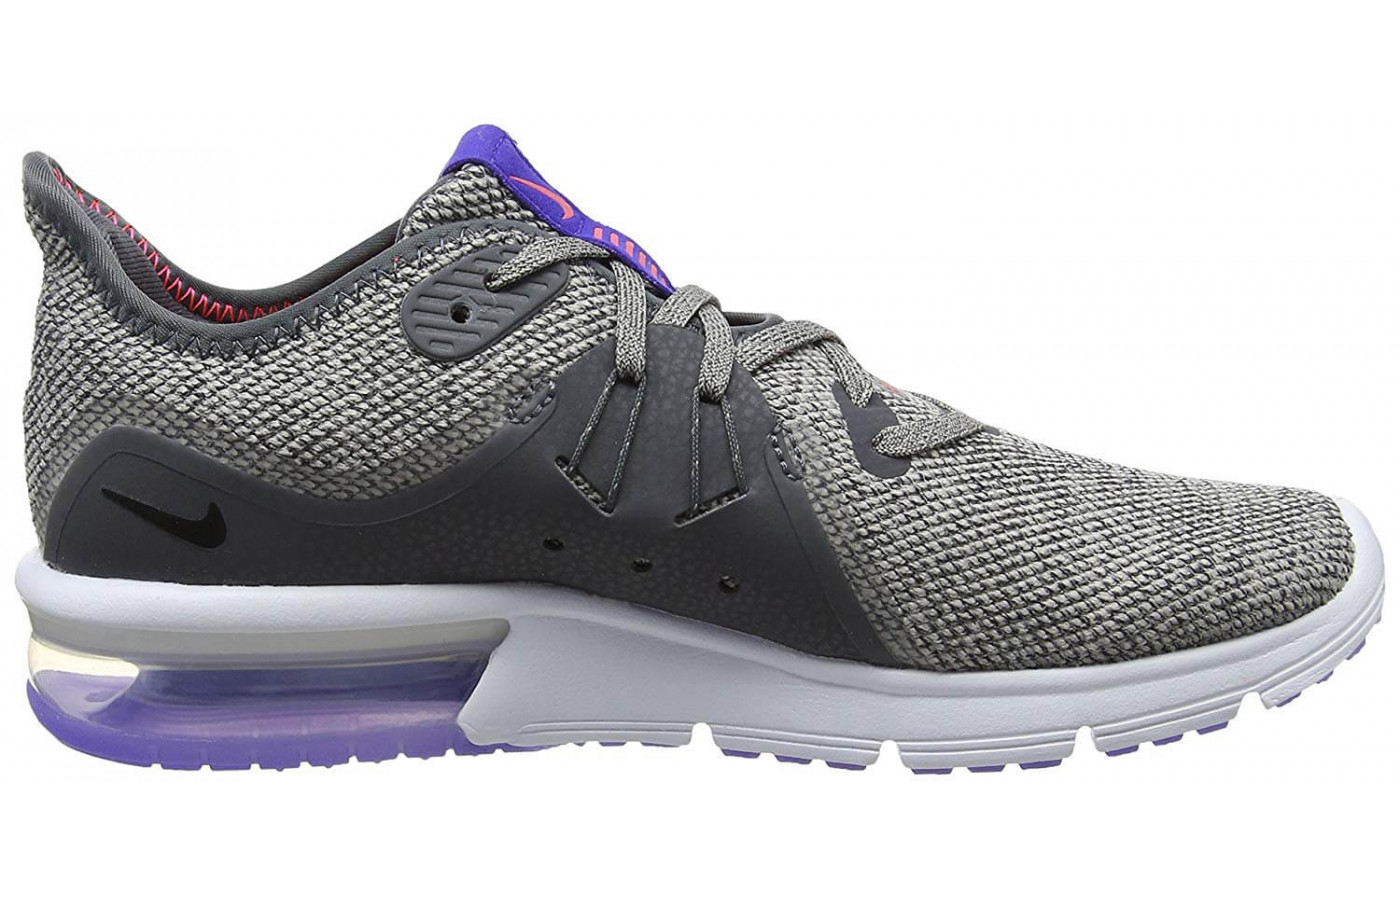 The Air Max Sequent 3 features a Phylon midsole with an Air Max Unit